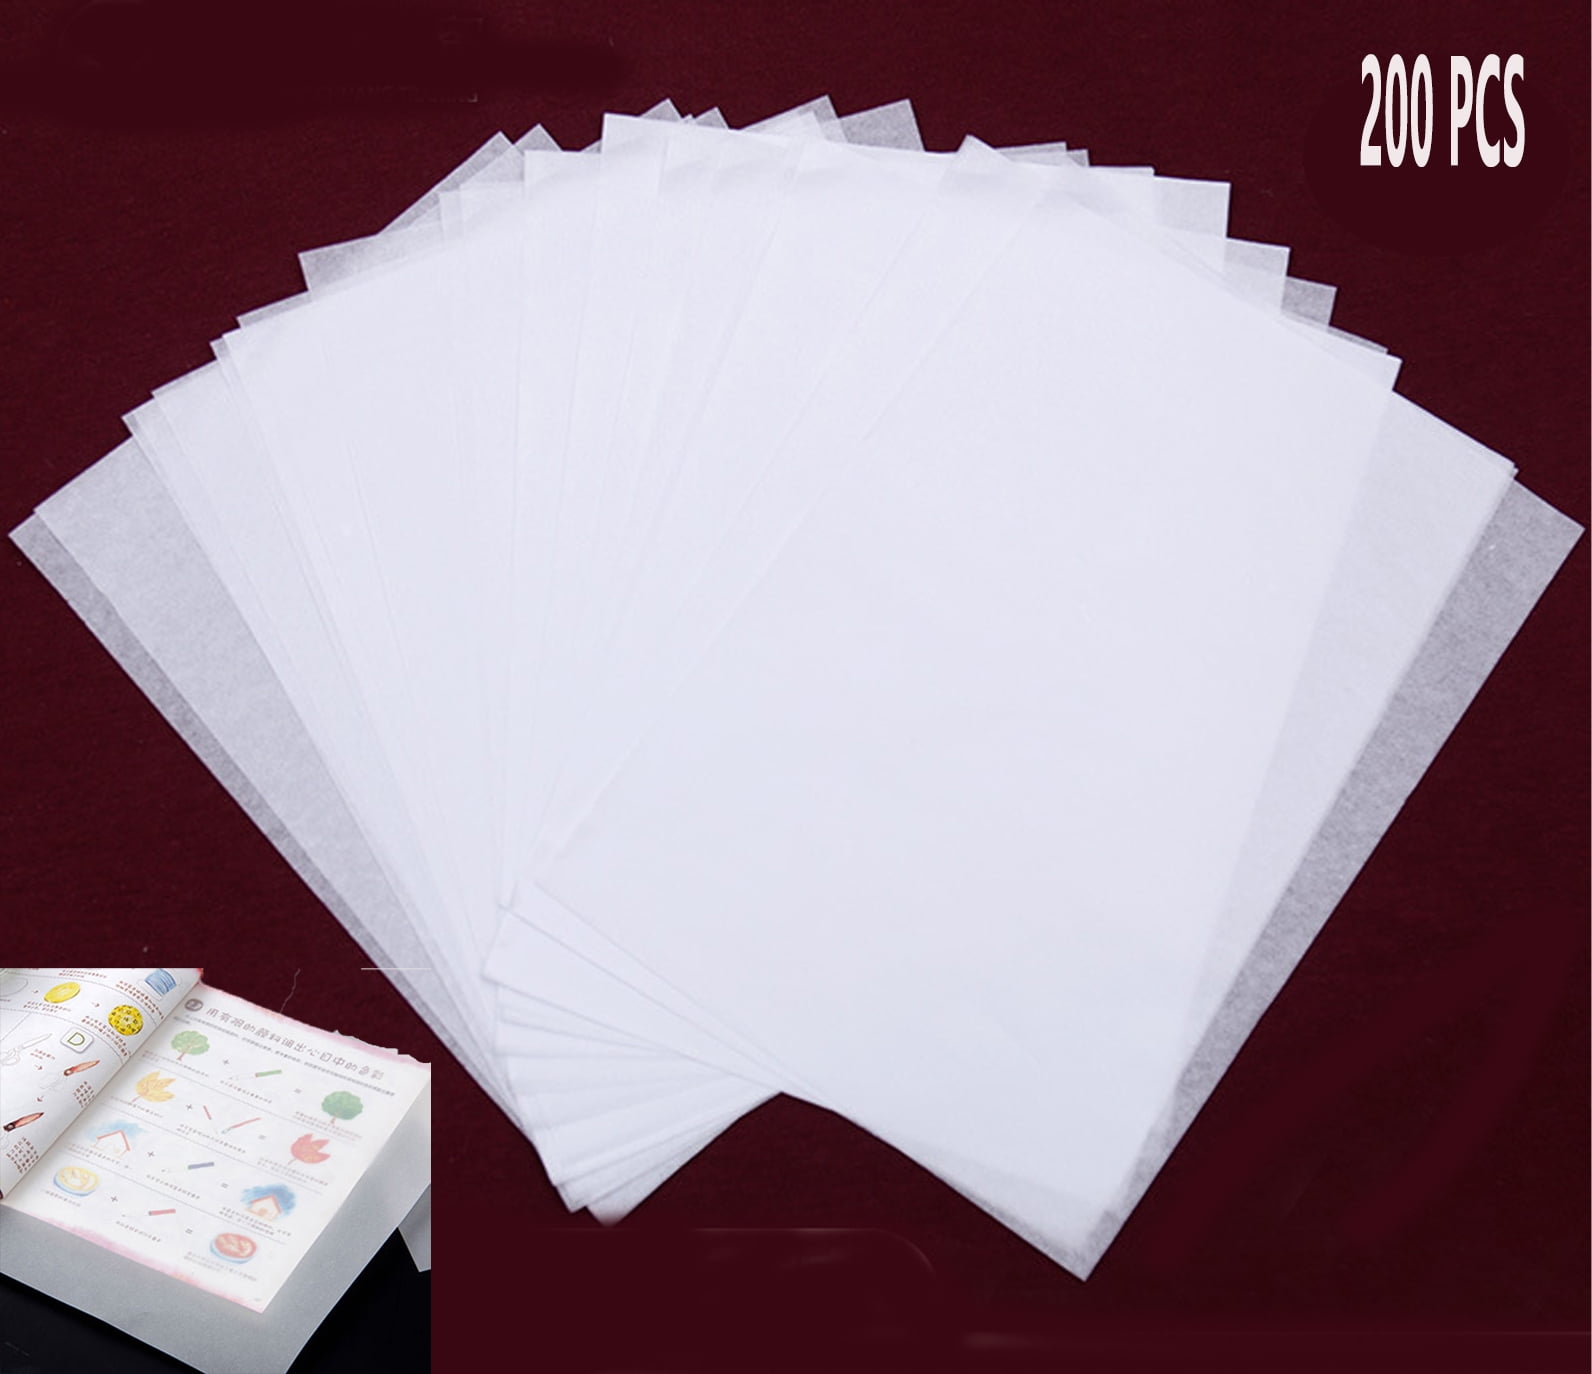 200 Sheets Tracing Paper 8.5 X 11 Inches Artists Tracing Paper White Trace  Paper